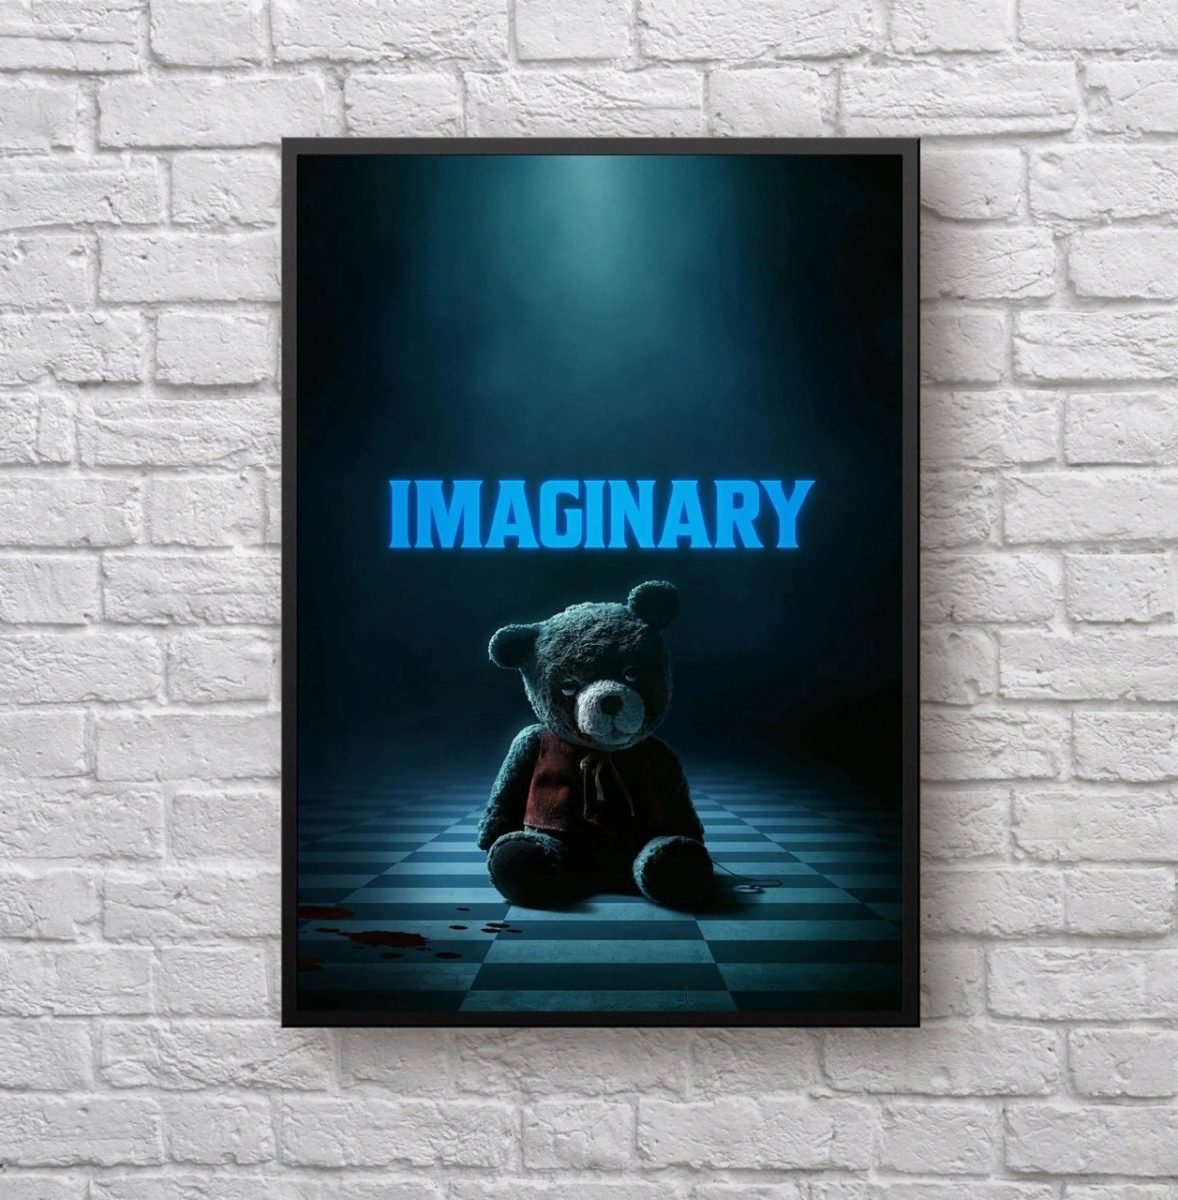 A+poster+hangs+on+a+wall%2C+displaying+an+image+of+Chauncey+Bear%2C+featured+in+the+film+%E2%80%9CImaginary%E2%80%9D.+Chauncey+was+a+key+character+in+the+film+and+provided+many+frights+for+viewers.